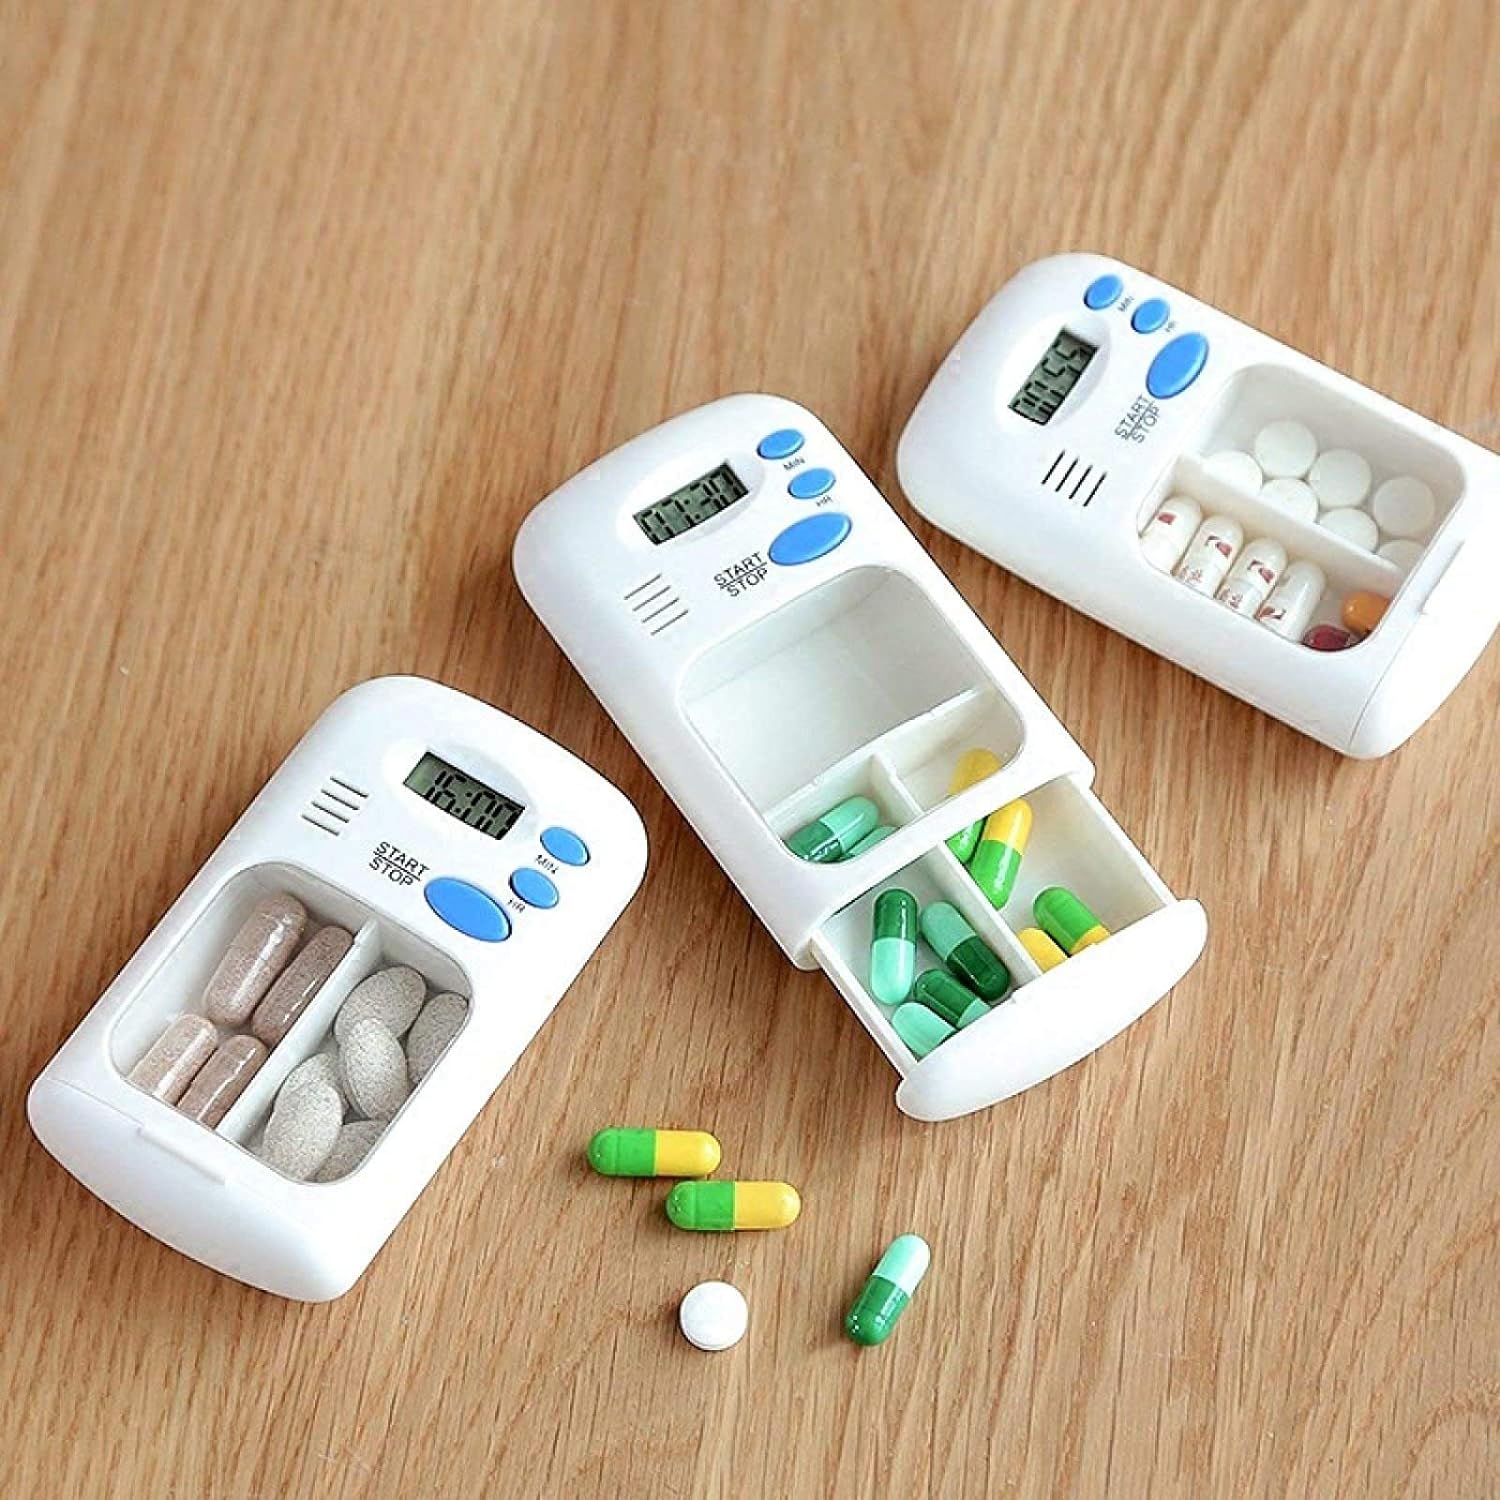 The Portable Mini Travel Carry Pill Box is placed on the table next to some pills